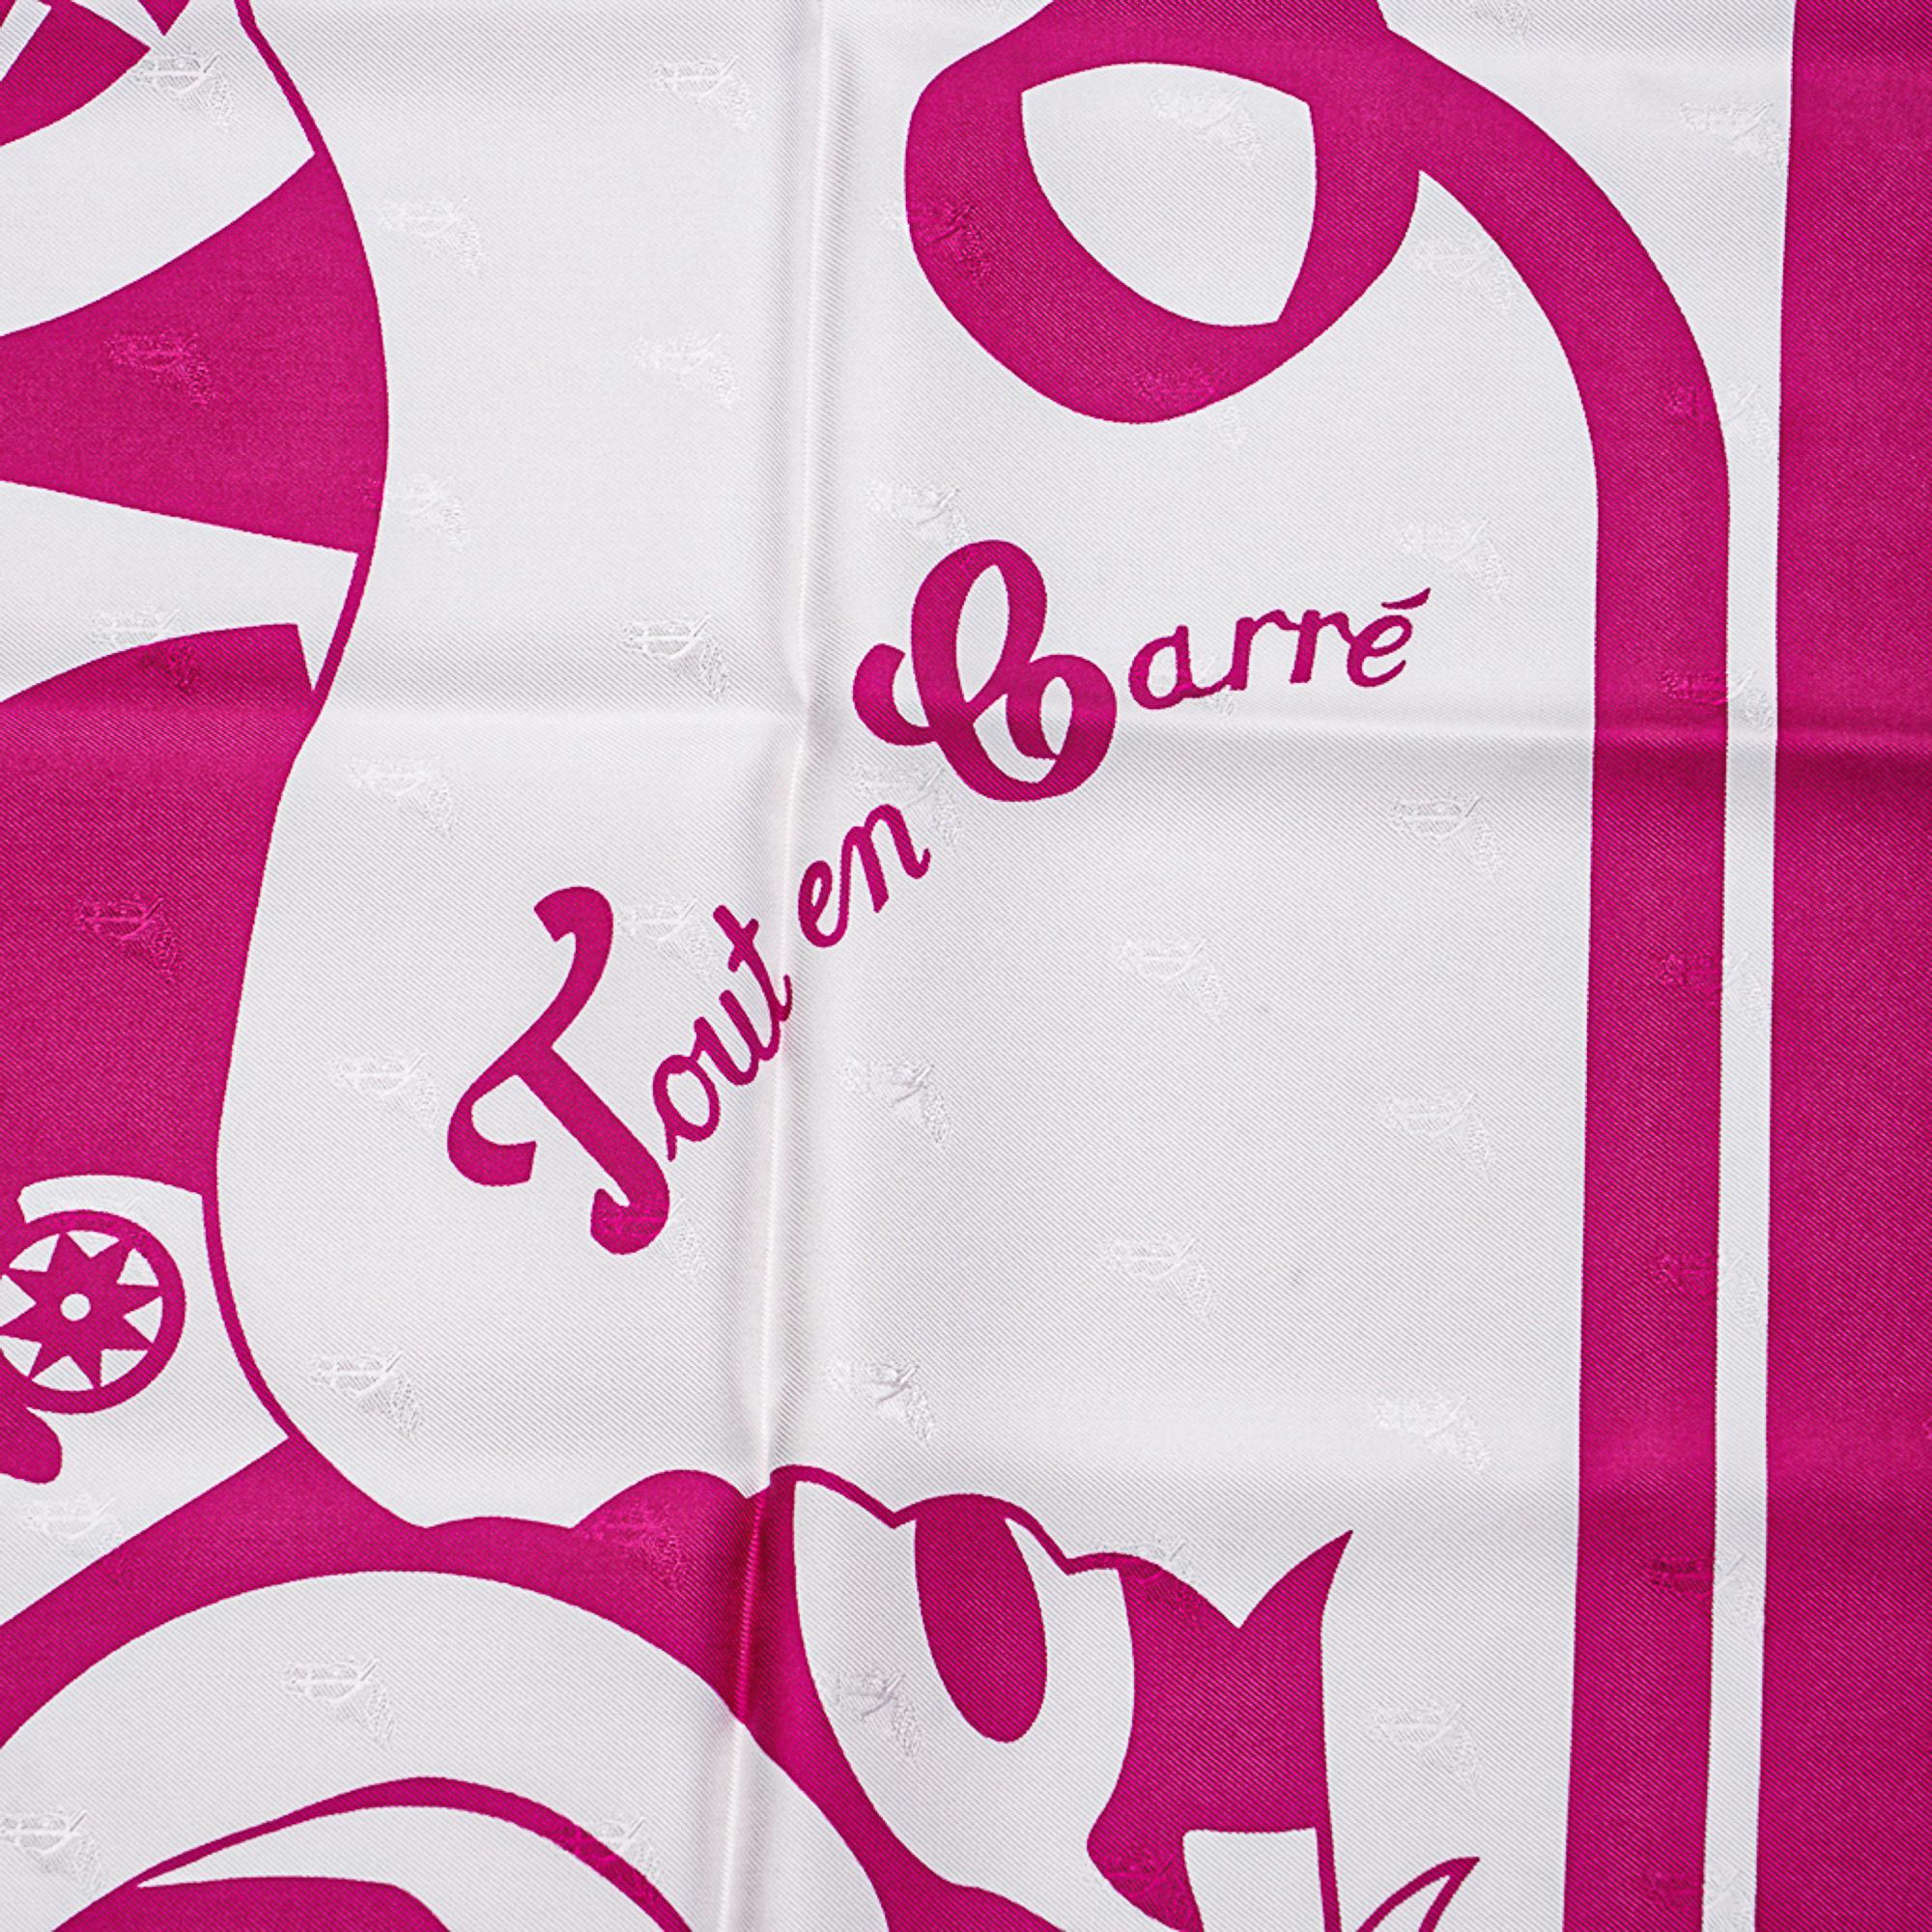 Mightychic offers a guaranteed authentic Hermes Tout en Carre Silk scarf by Bali Barret.
Pink and White colorway.
First issued in 2006, the scarf depicts the deconstructed Ex-Libris symbol for the House of Hermes.
Hints of past carres are in the